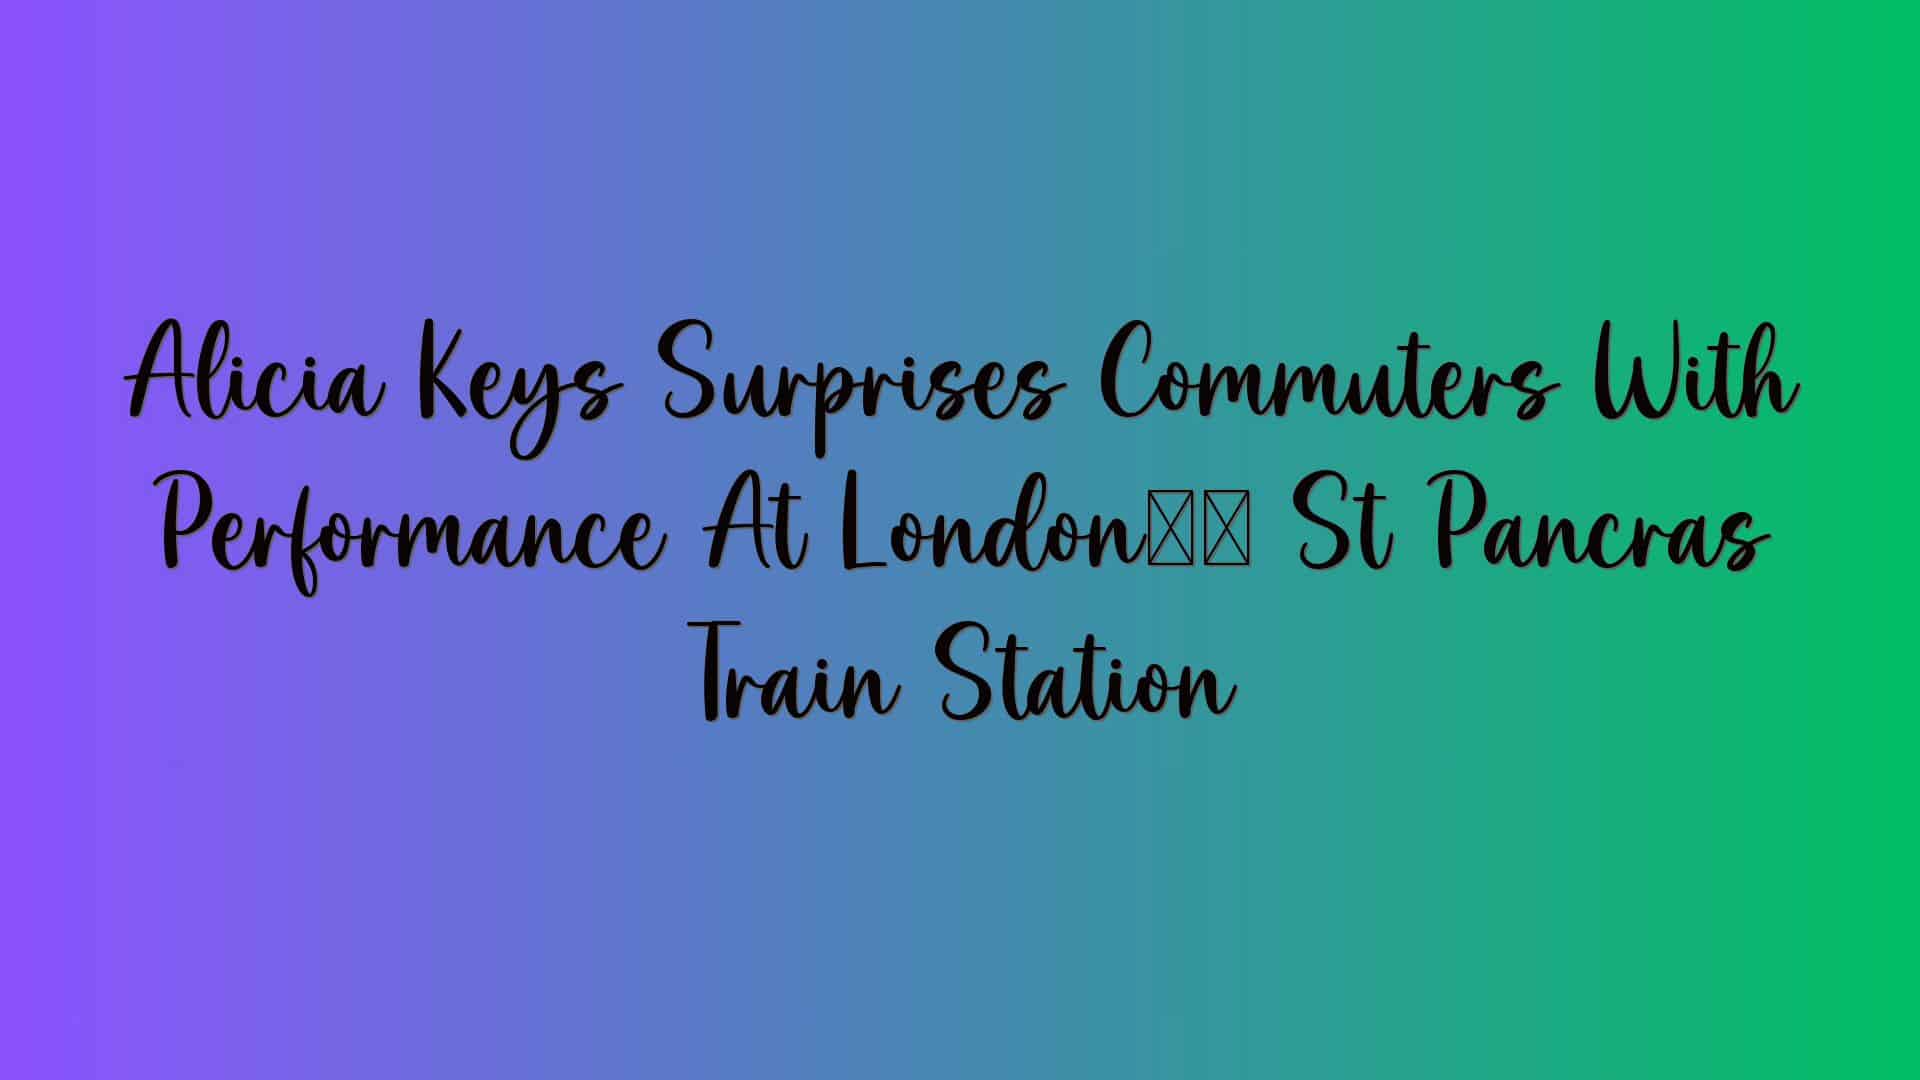 Alicia Keys Surprises Commuters With Performance At London’s St Pancras Train Station